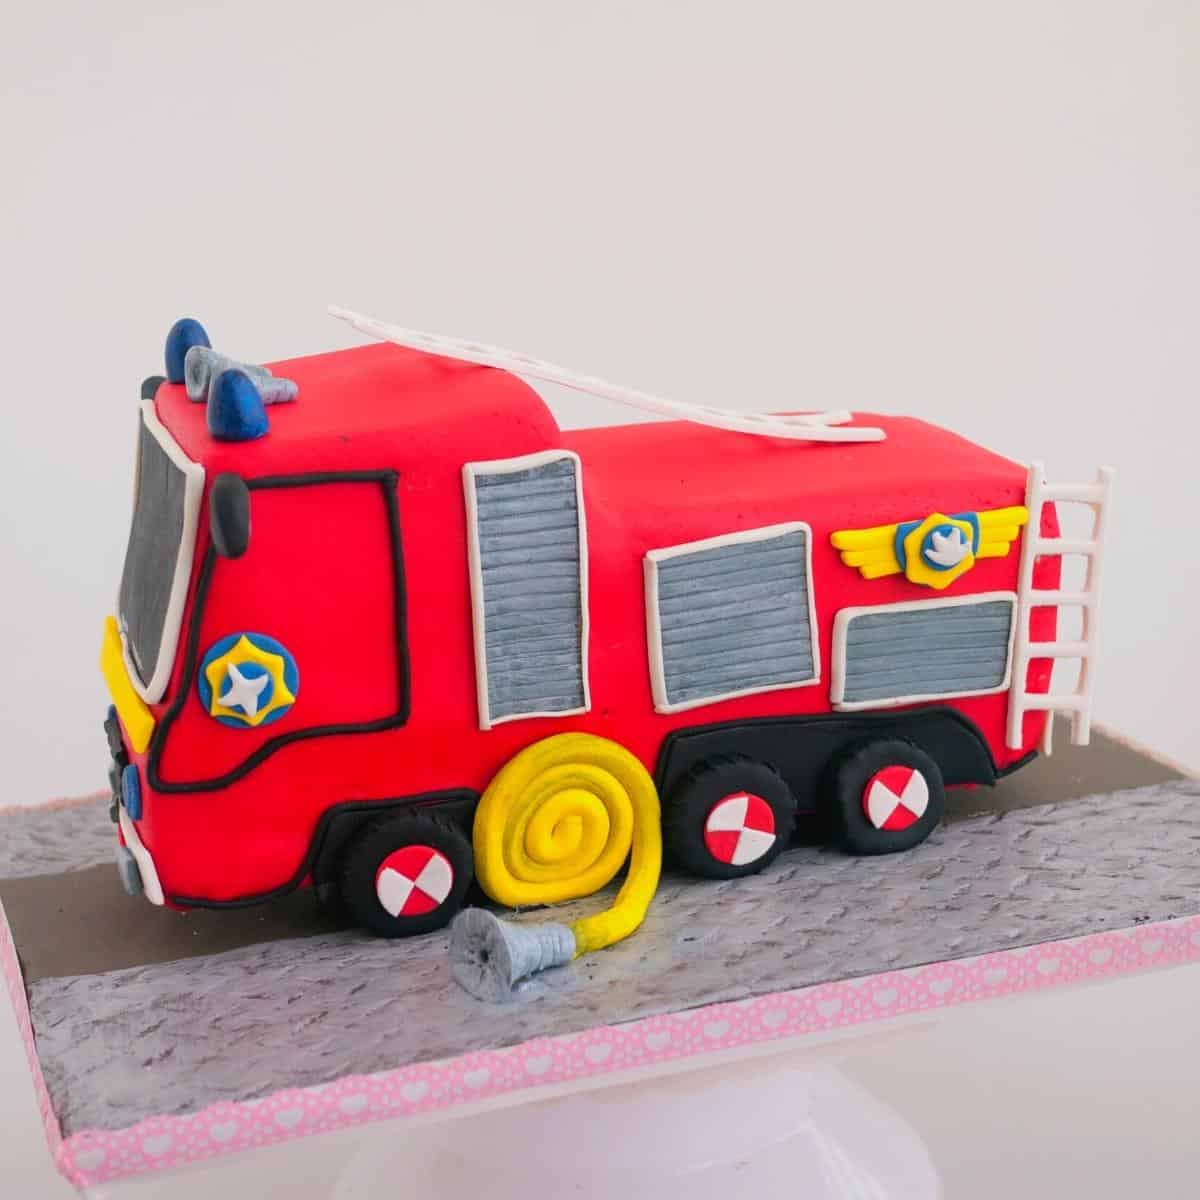 A cake board with fire truck cake in fondant.